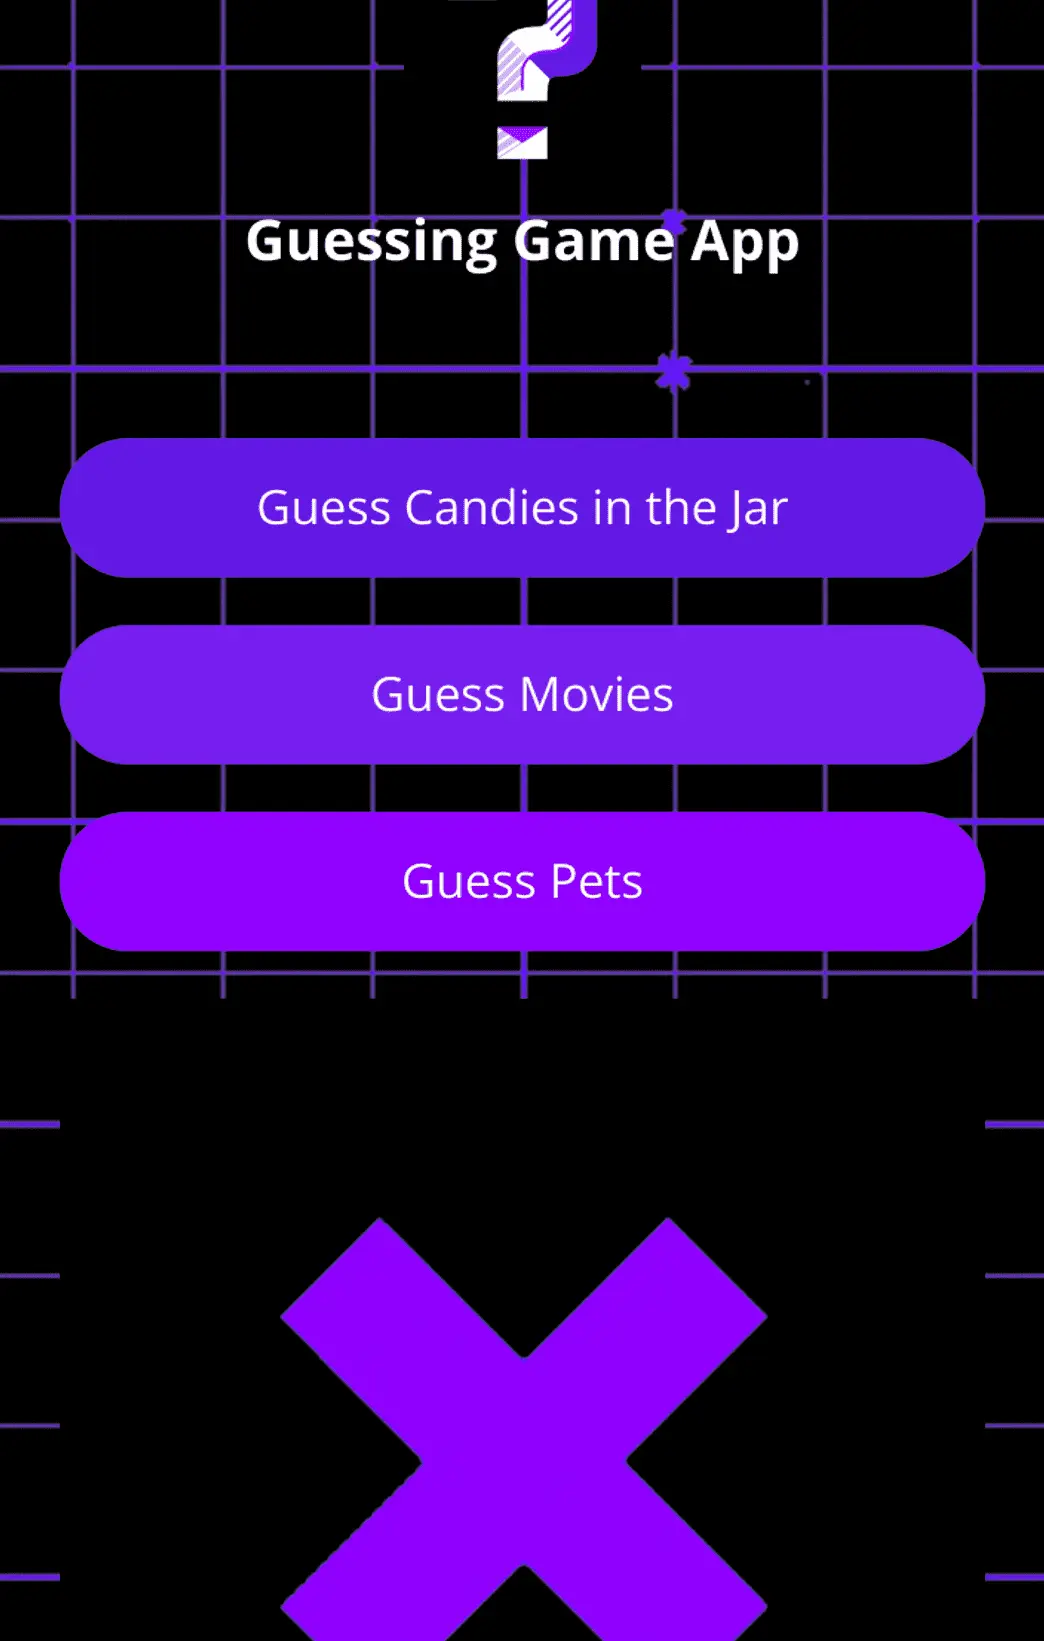 Guessing Game App